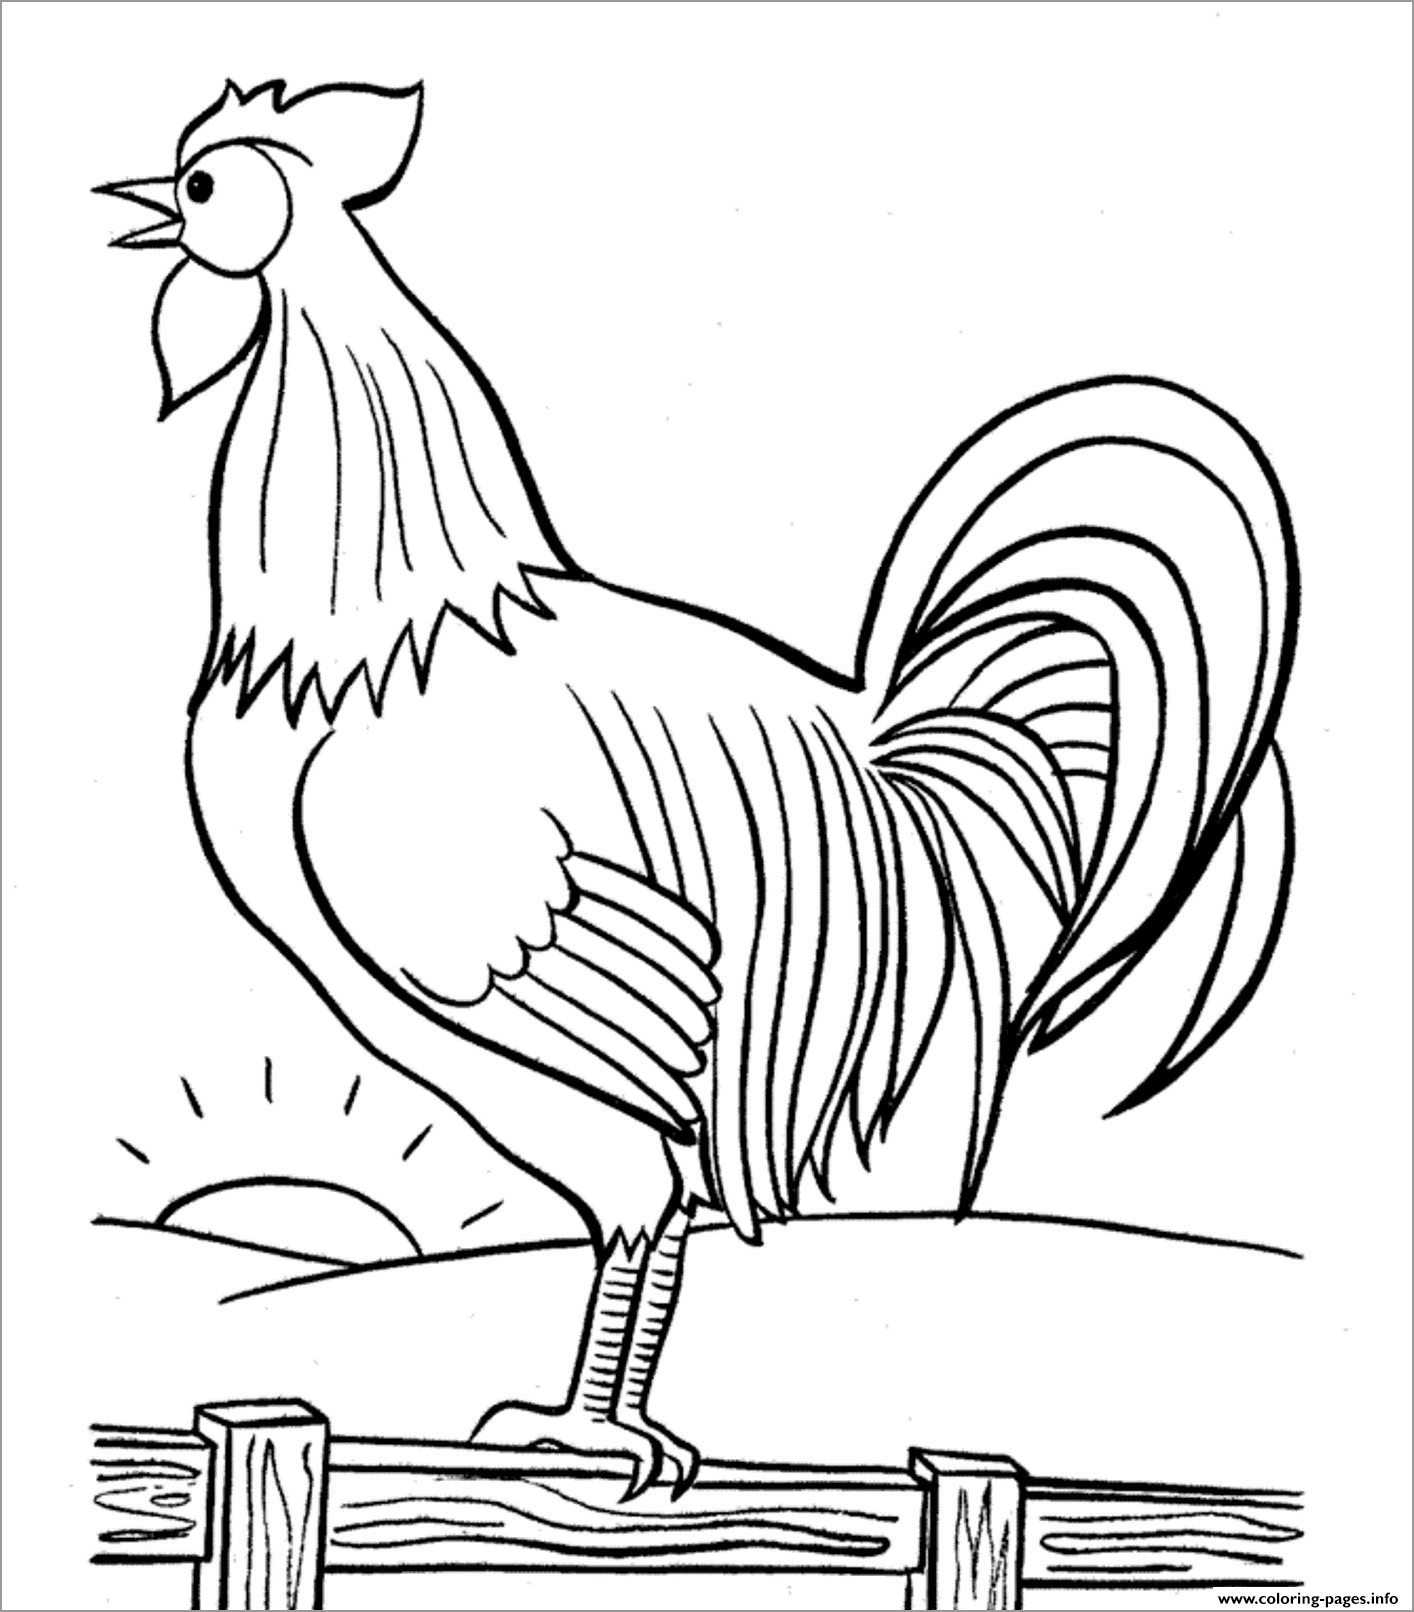 Rooster Crowing In the Morning Coloring Page